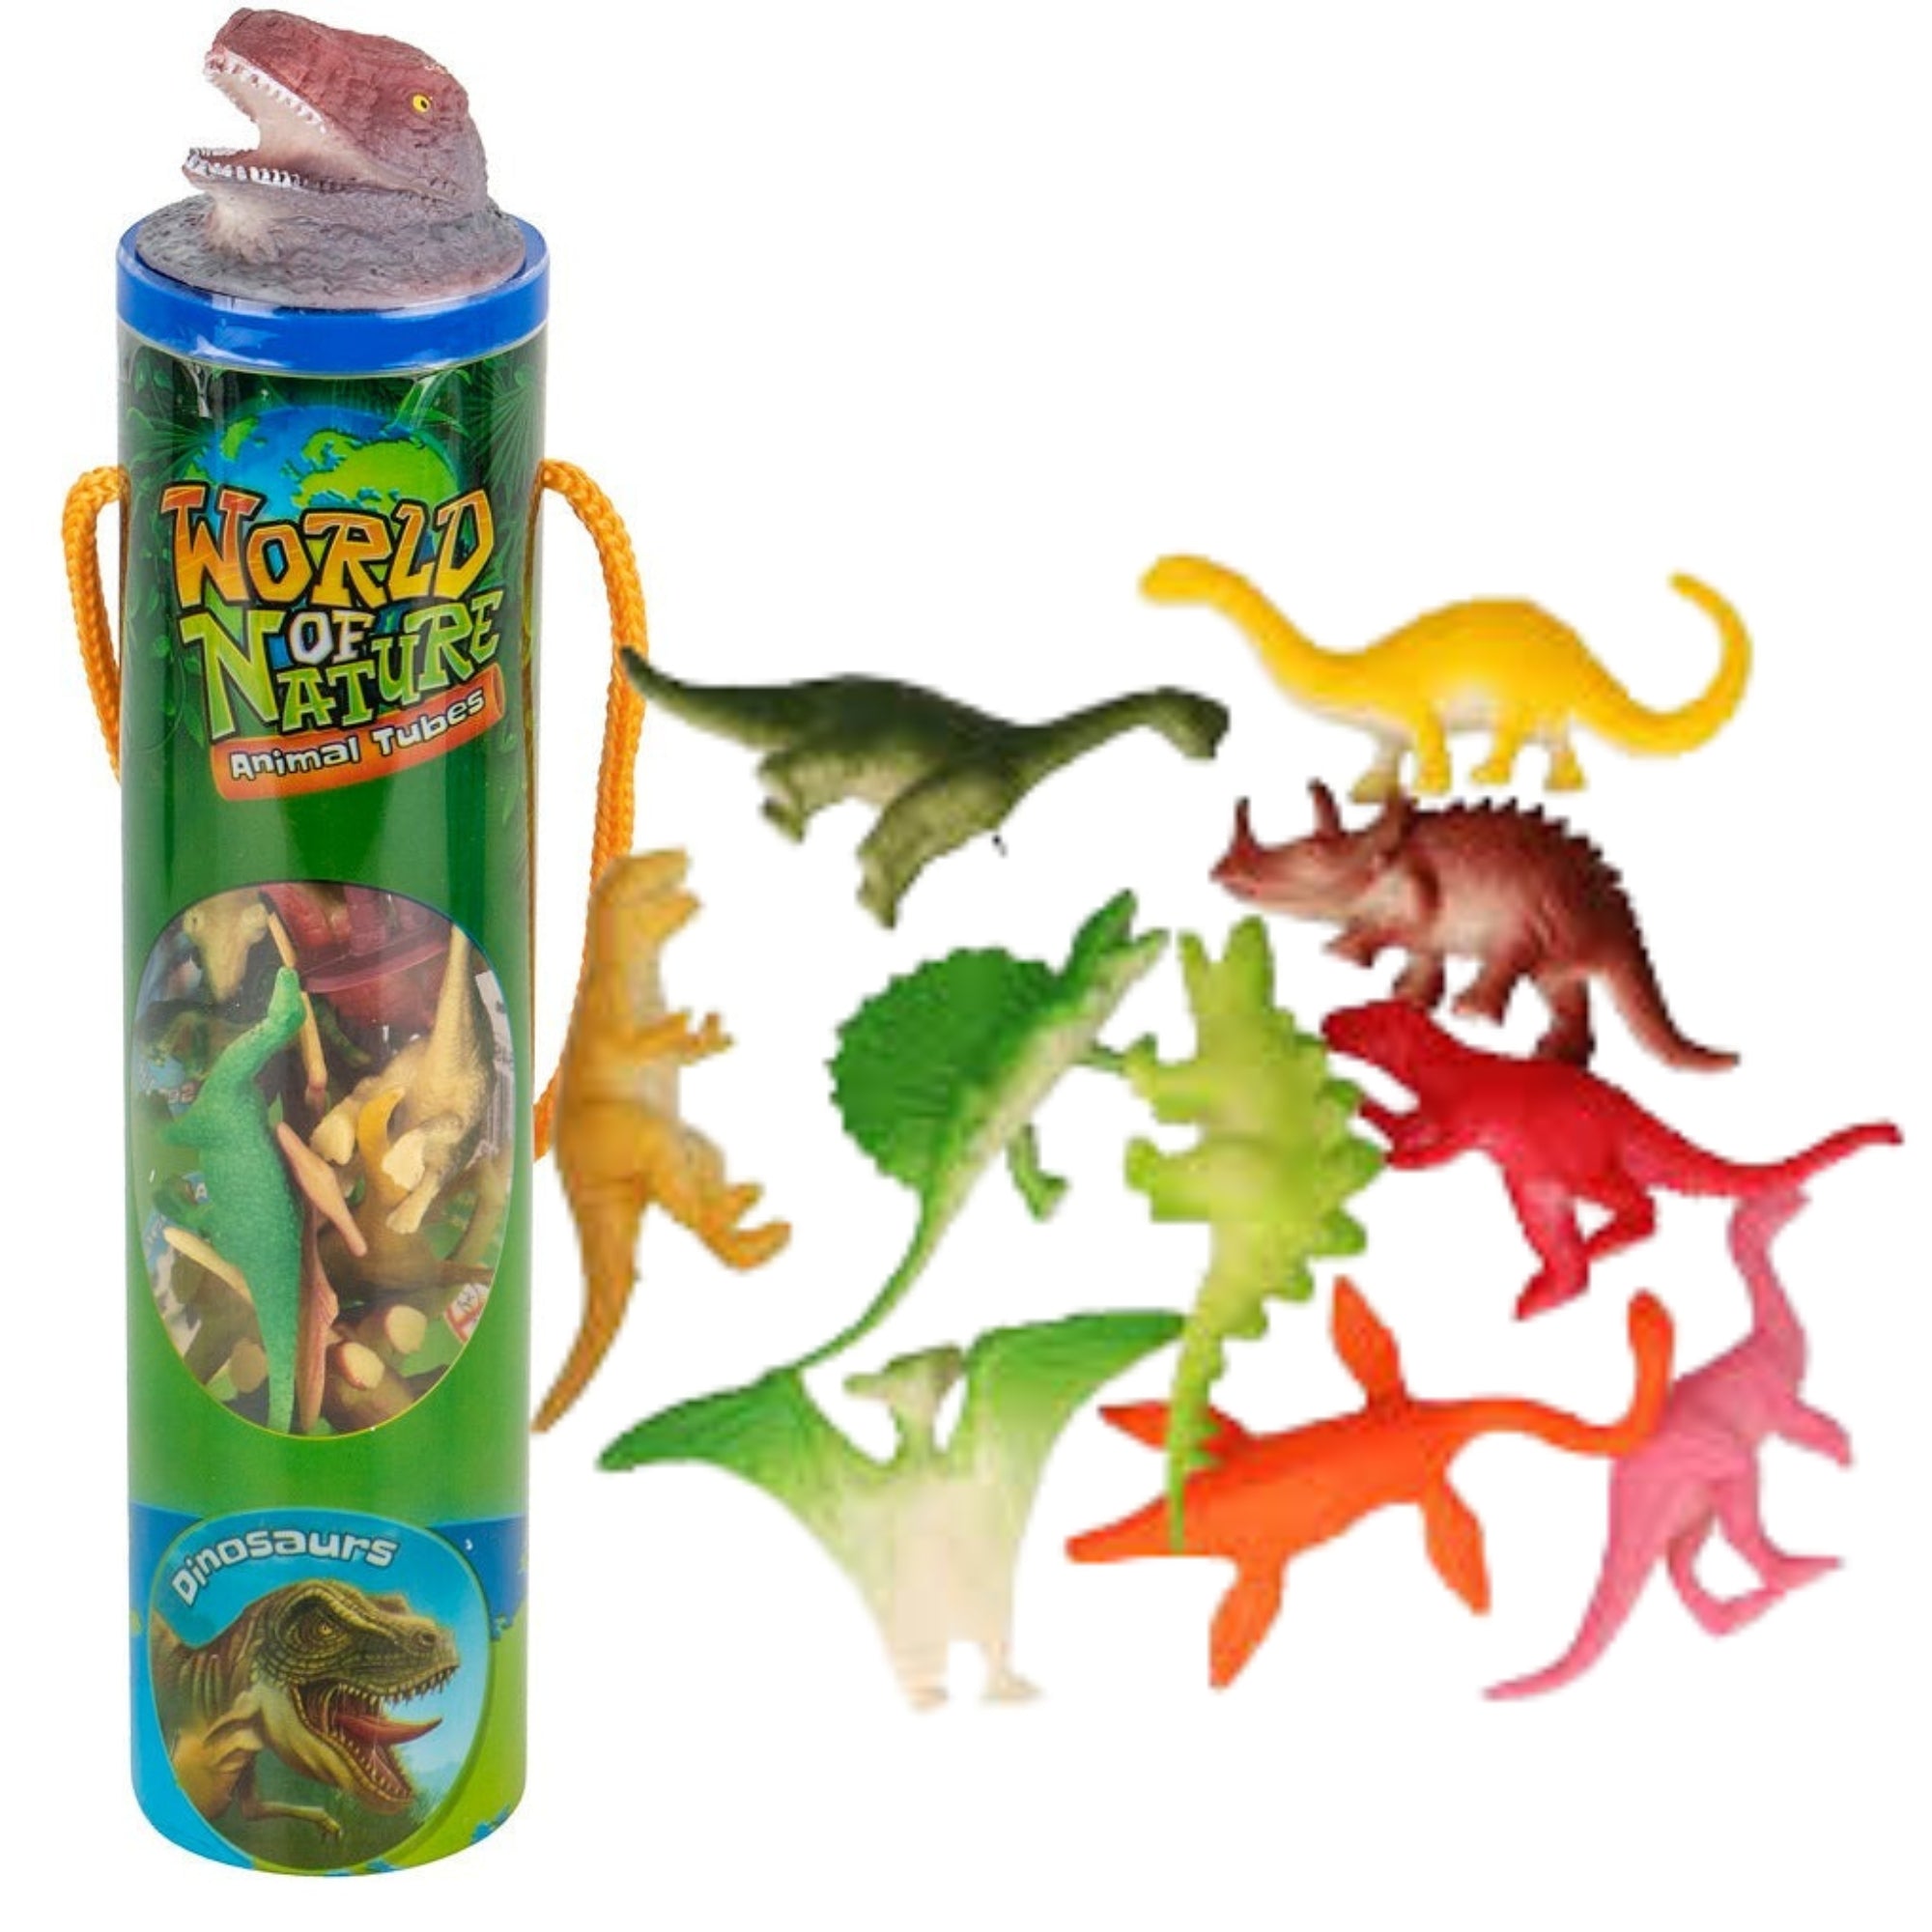 Dinosaur Tube, that will transport children to the prehistoric era. With its vibrant colors and detailed designs, the Dinosaur Tube allows kids to engage in imaginative play and explore the world of dinosaurs right in their own playroom. Whether they are setting up a Jurassic Park adventure or creating their own dinosaur museum, this tube of mini dinosaur figures will surely capture their imagination and keep them entertained for hours.The Dinosaur Tube is also a great addition to any prehistoric themed jam